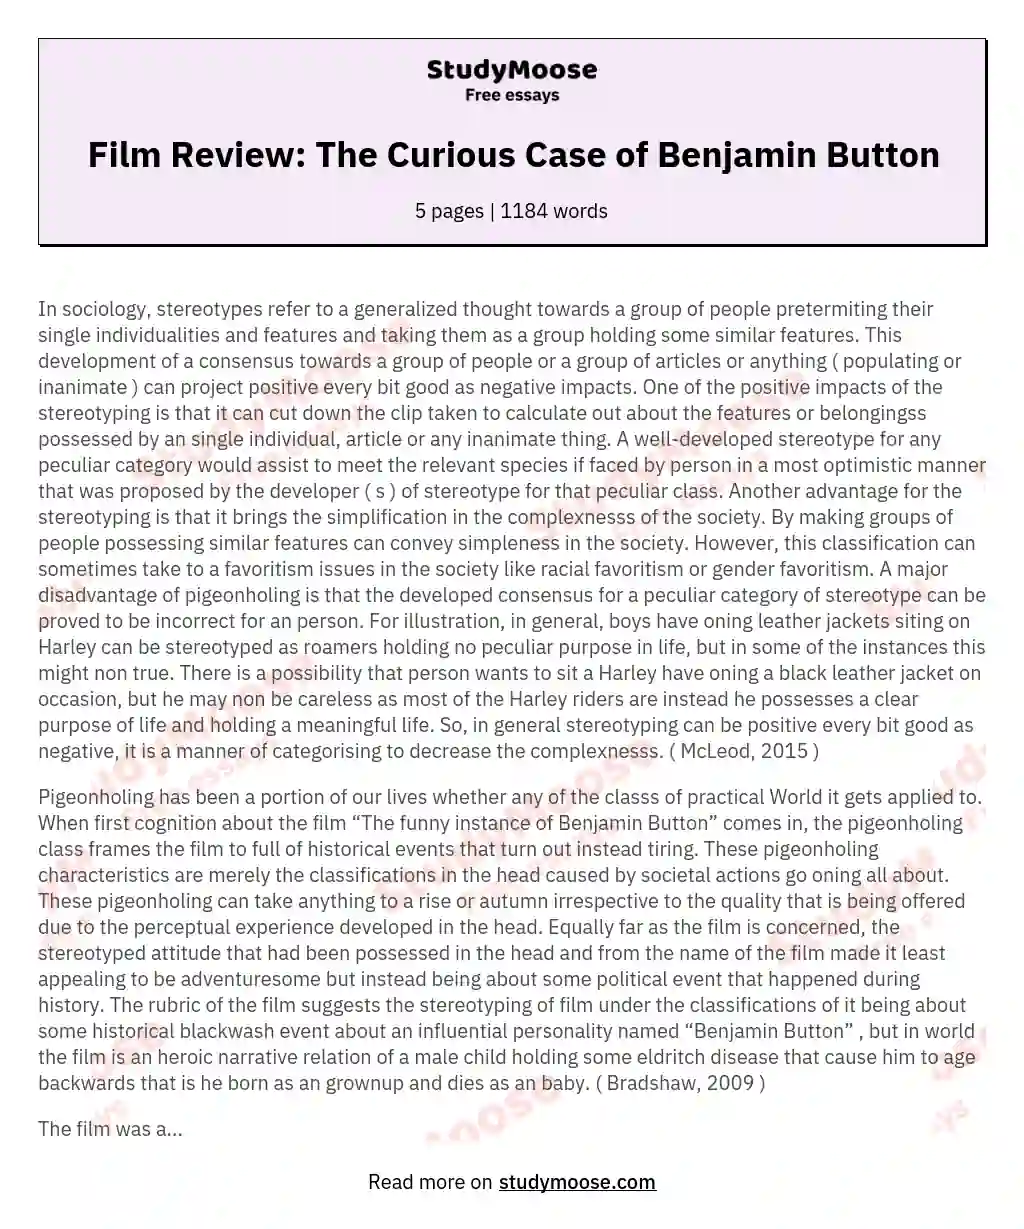 Film Review: The Curious Case of Benjamin Button essay